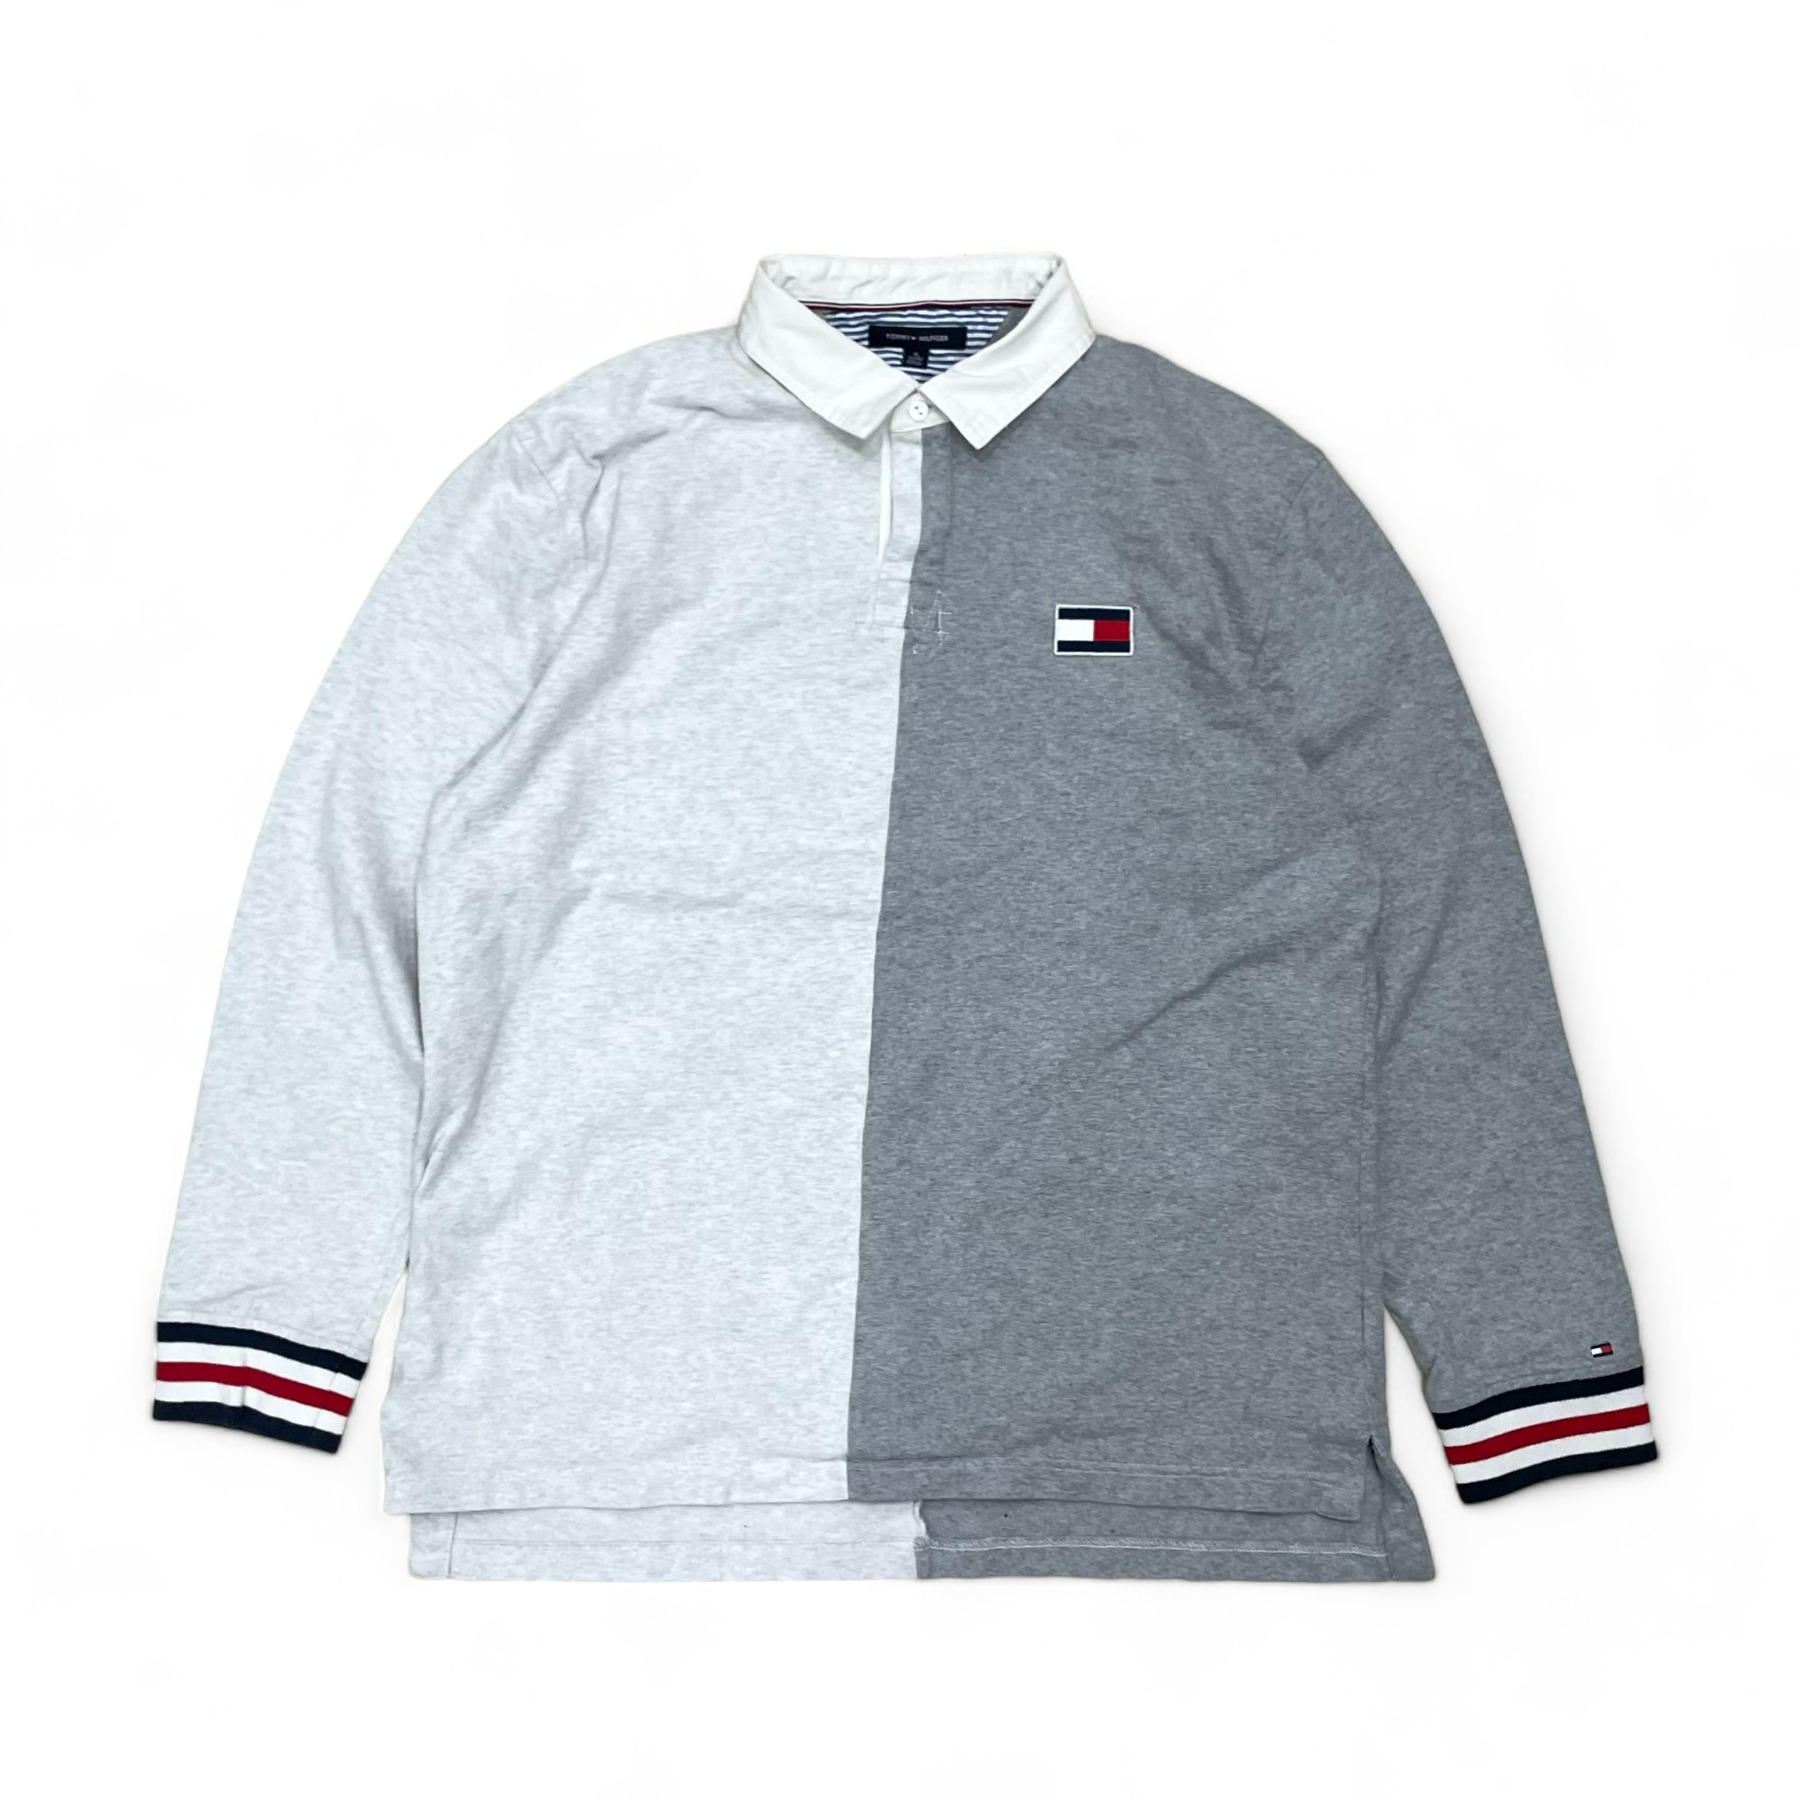 2018 Tommy HIlfiger Two Tone Rugby Shirt